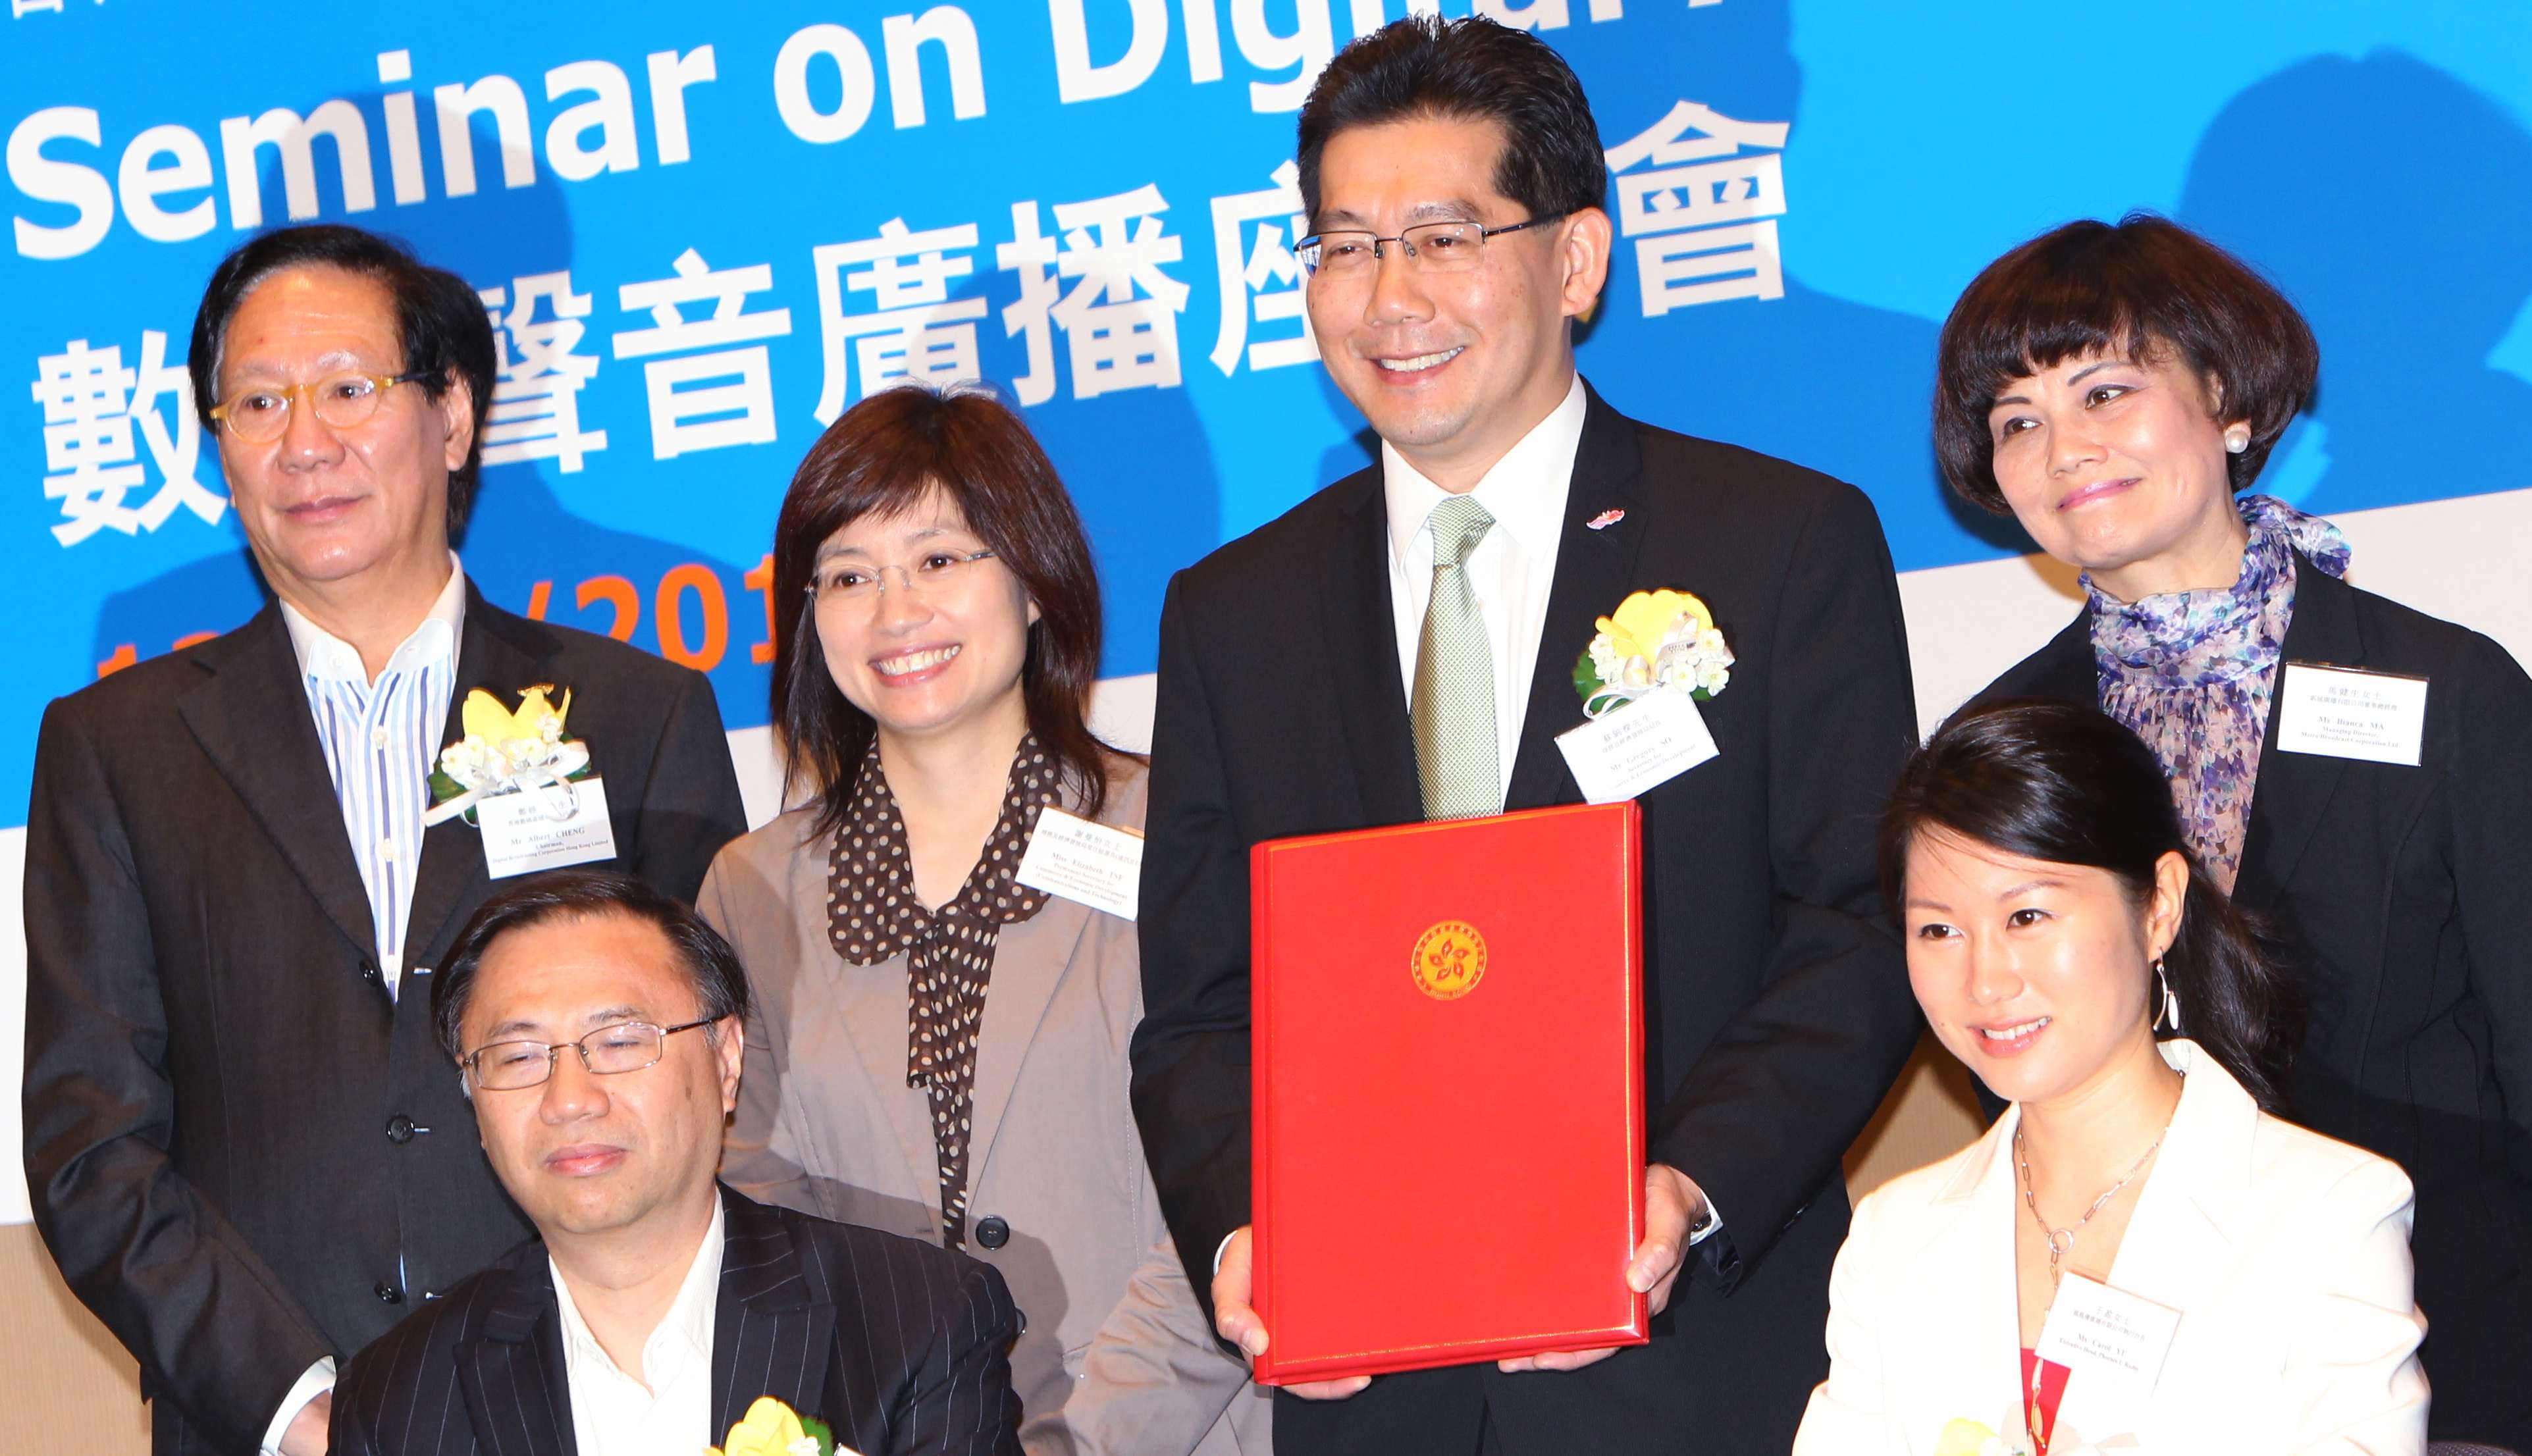 Commerce and Economic Development Secretary Greg So Kam-leung and then permanent secretary Elizabeth Tse Man-yee (back row, second and third right), with top management from Digital Broadcasting Corporation, Metro Broadcast Corporation and Phoenix U Radio, at the signing ceremony for the digital audio broadcasting network sharing agreement at the Convention and Exhibition Centre in Wan Chai, on October 13, 2011. Photo: Felix Wong